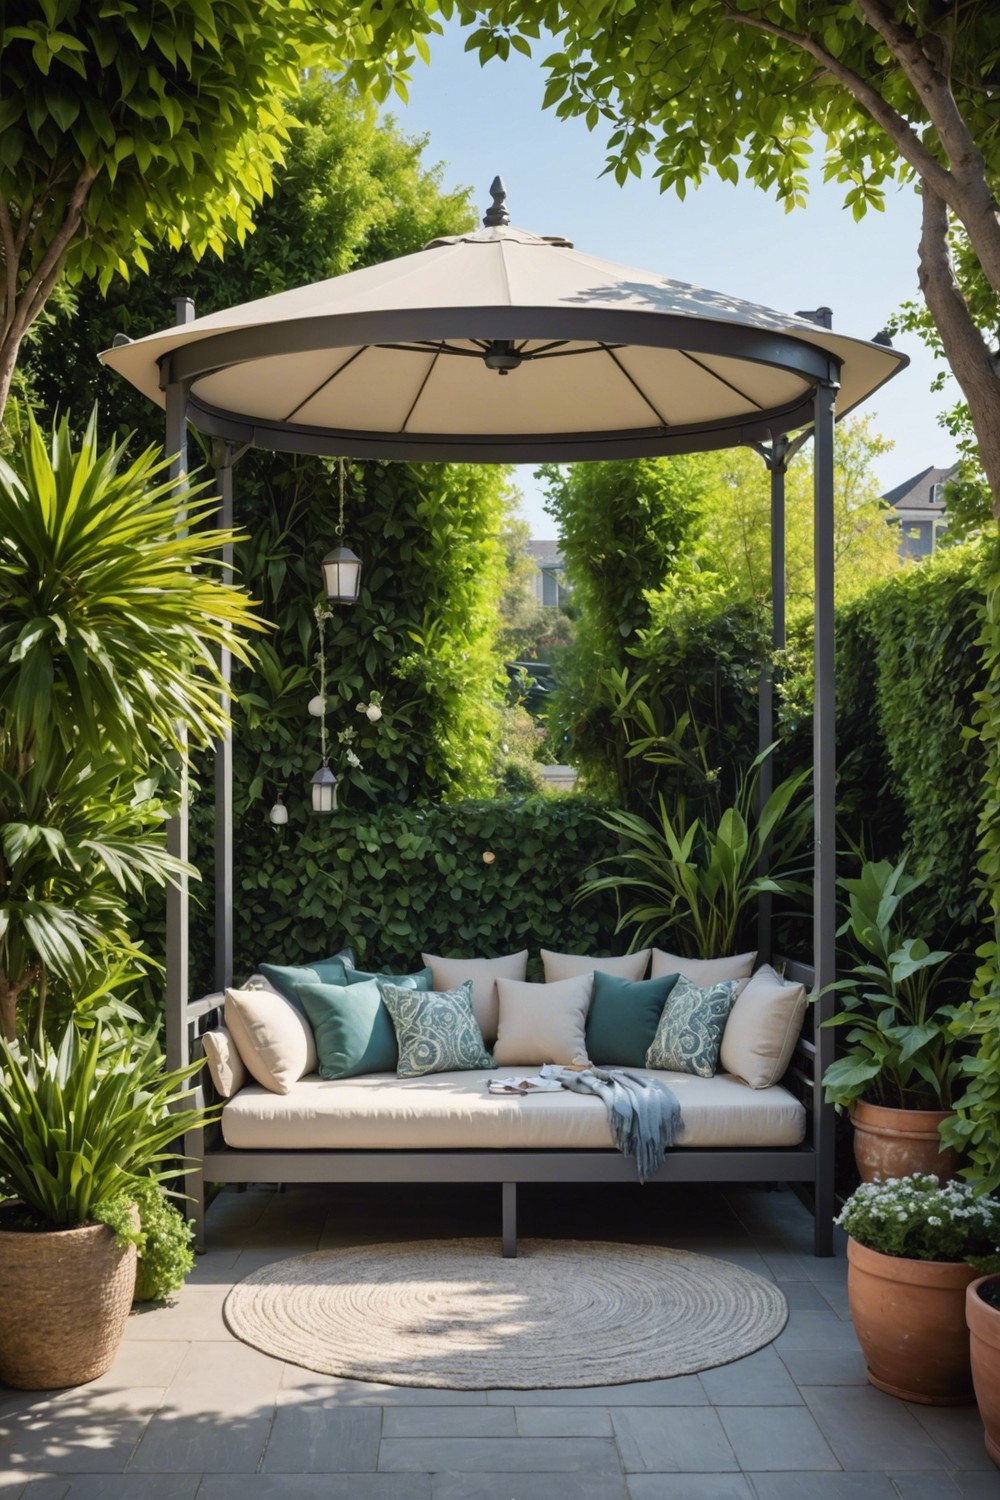 Outdoor Daybeds with Canopies for Shade